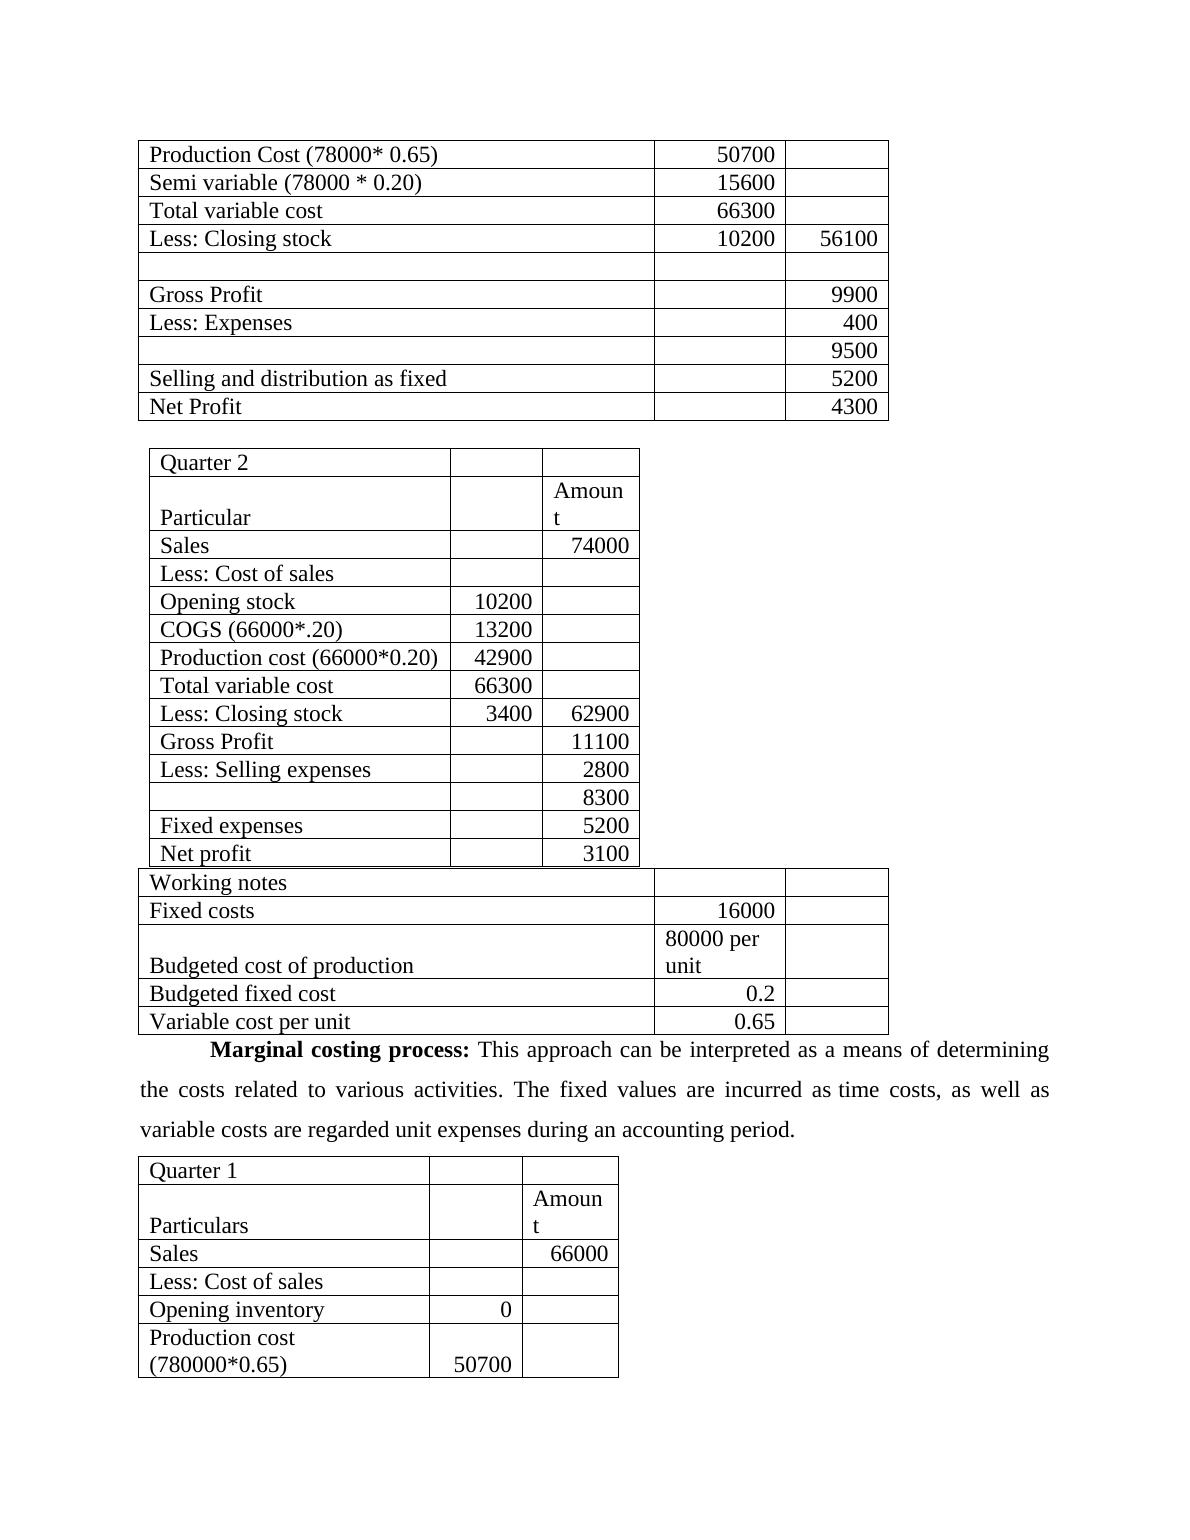 Cost Estimation and Analysis of Financial Statements through Marginal and Absorption Process_4